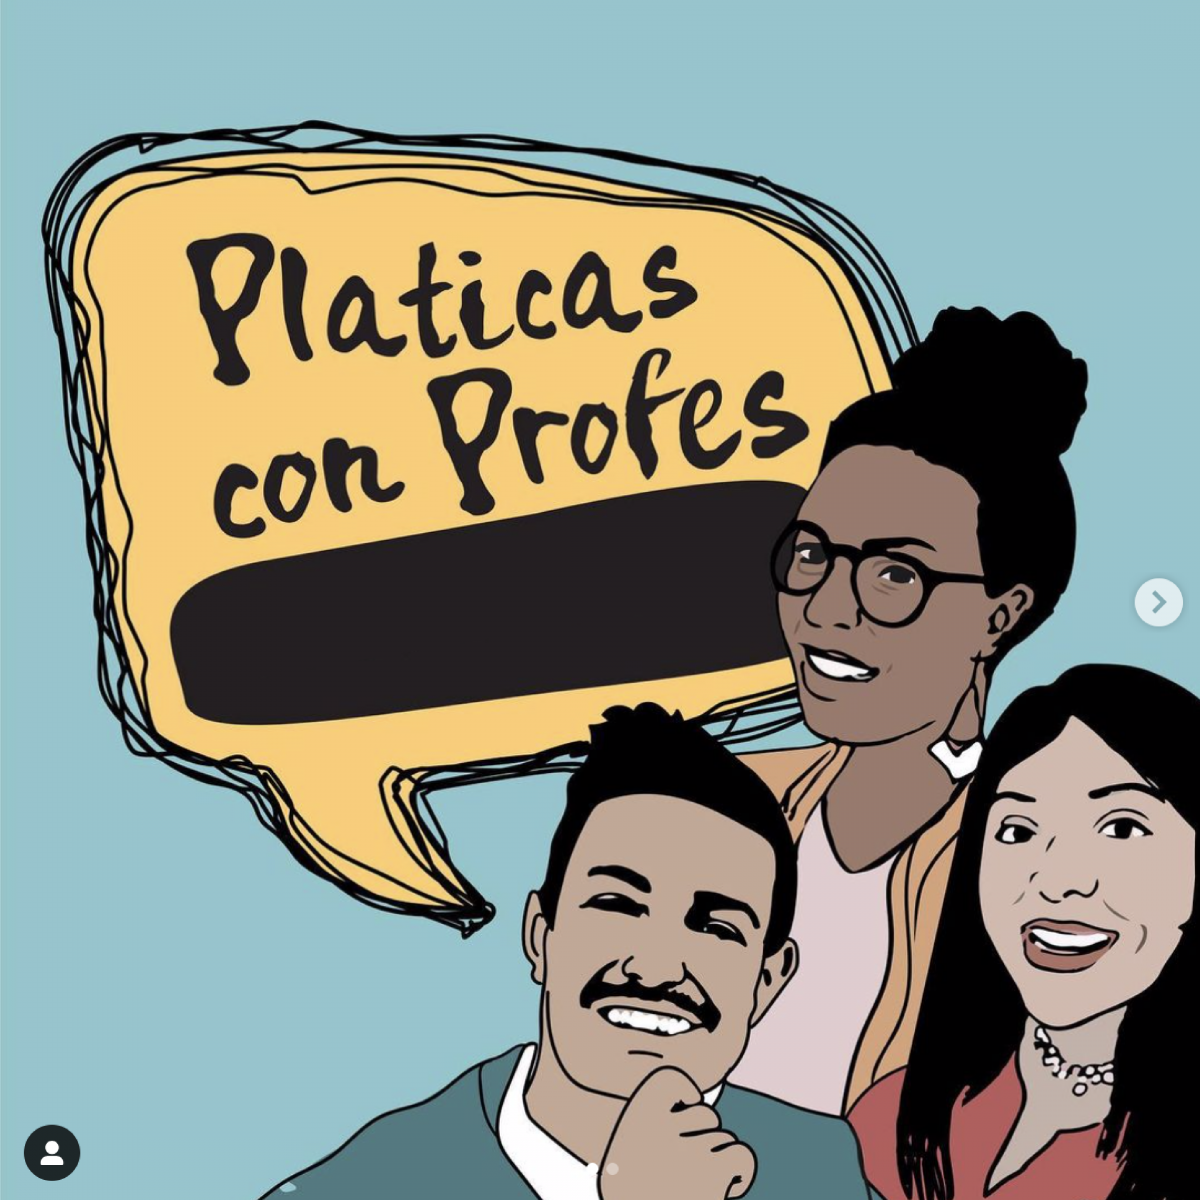 Illustration of people who appear to be talking. Pláticas con profes.